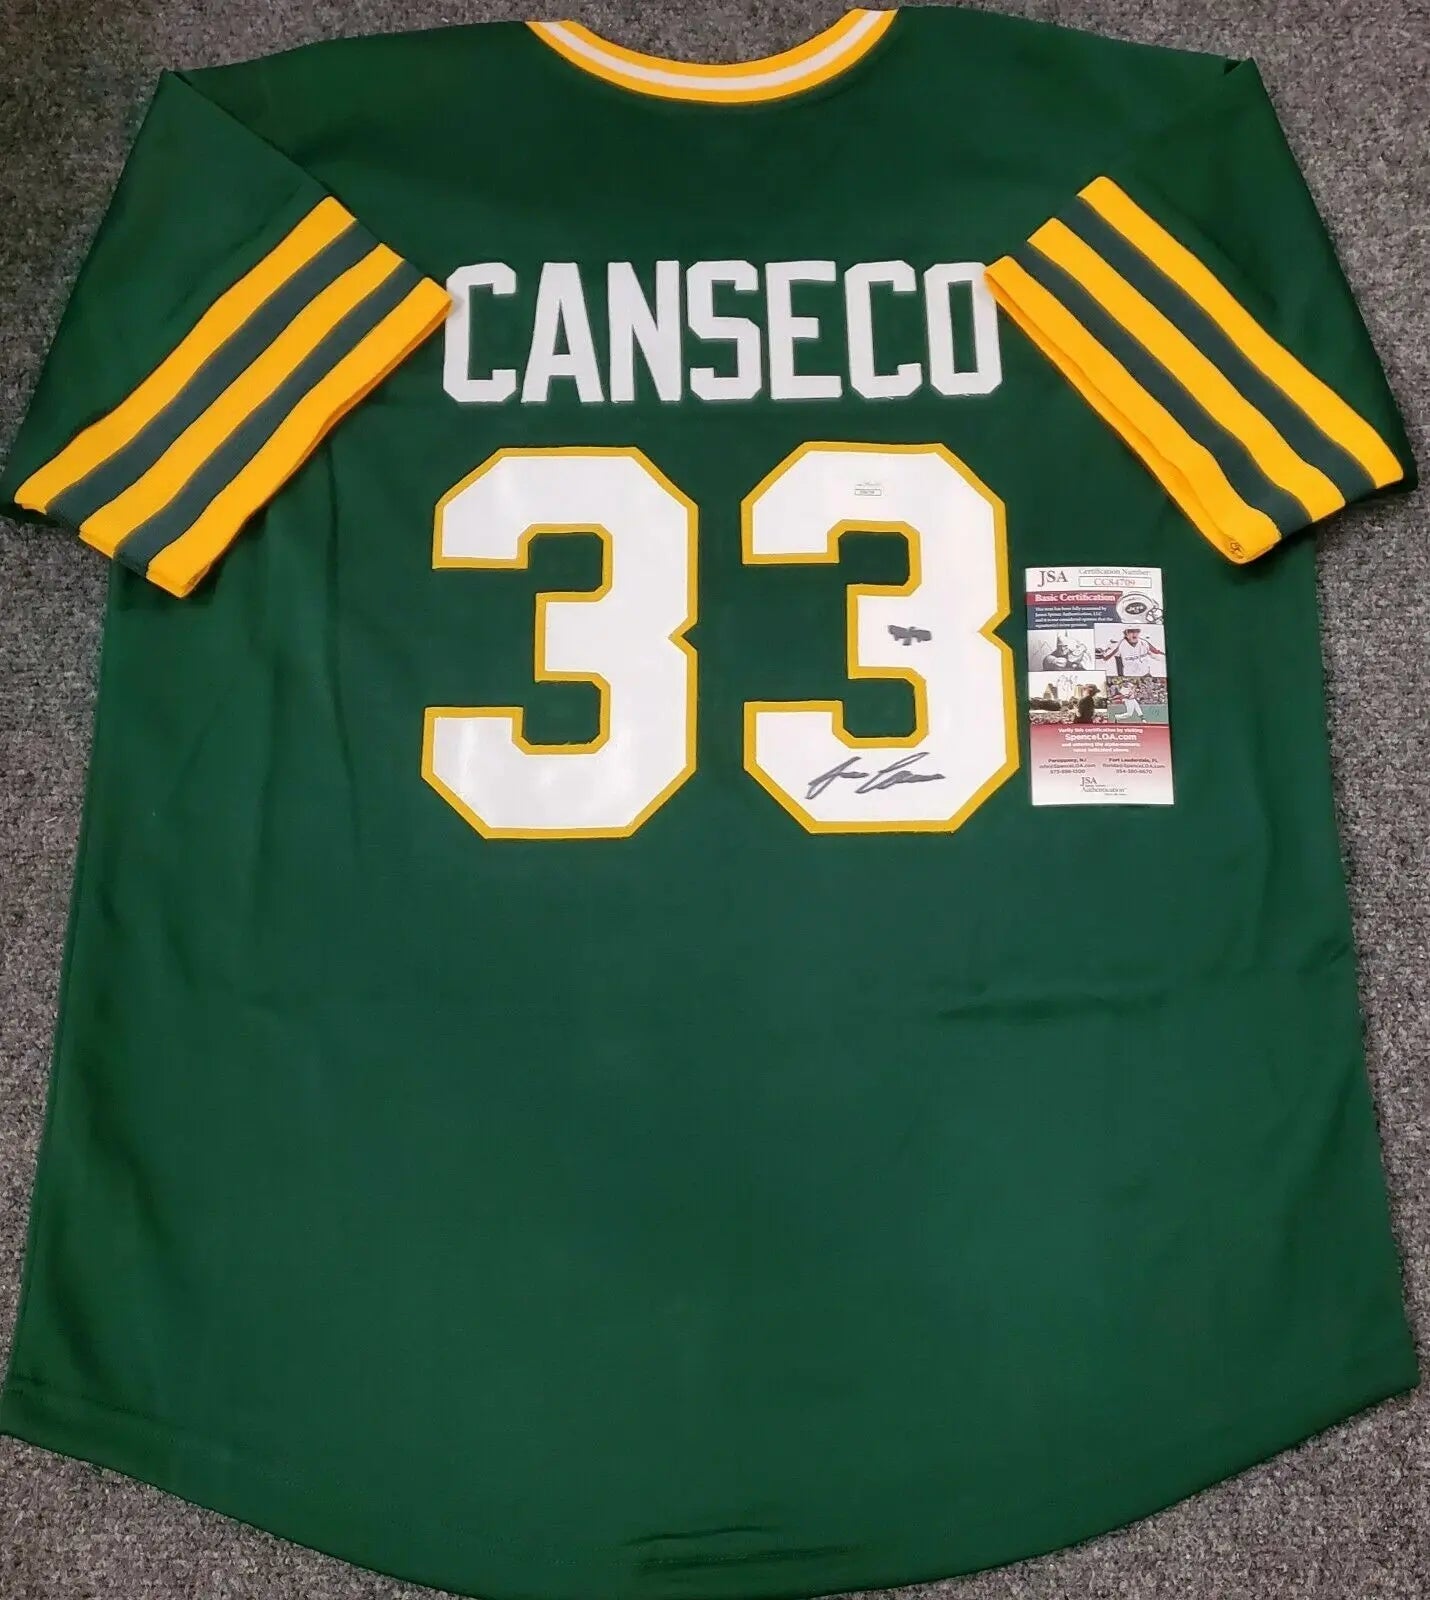 Autographed Red Sox Jersey- Jose Canseco #33 – Merrymaconline